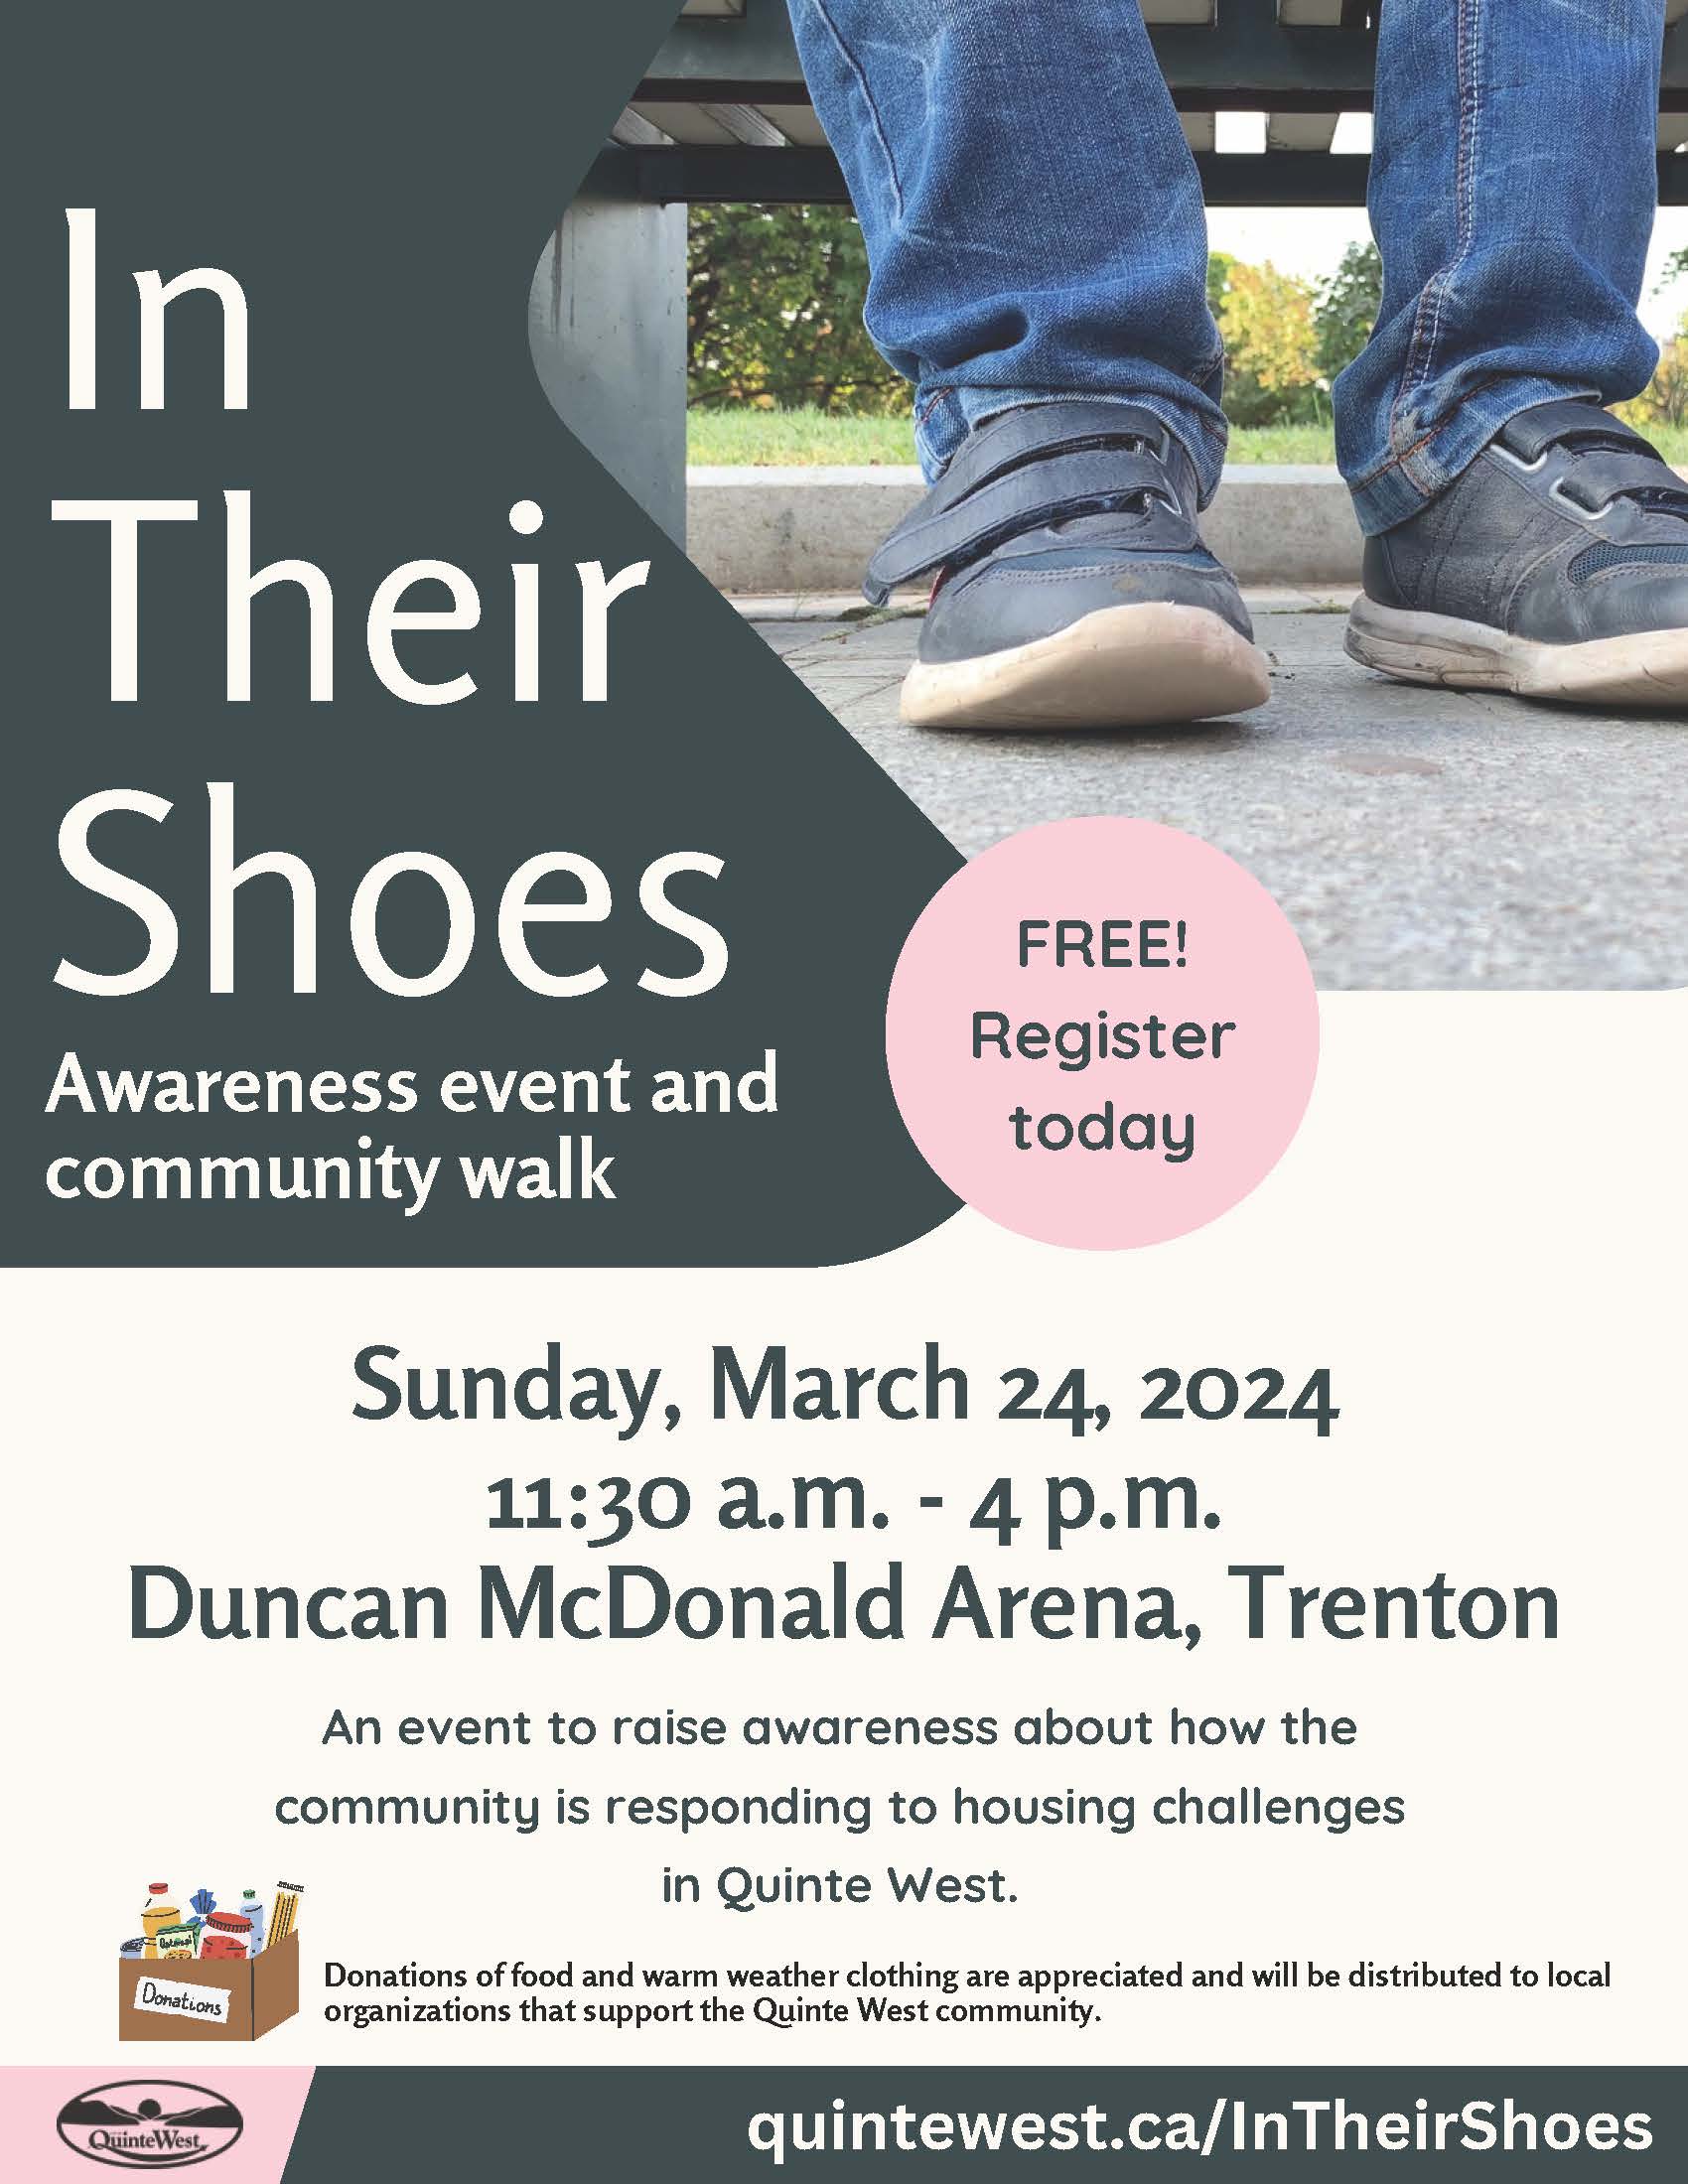 poster titled "In their shoes". Has event details